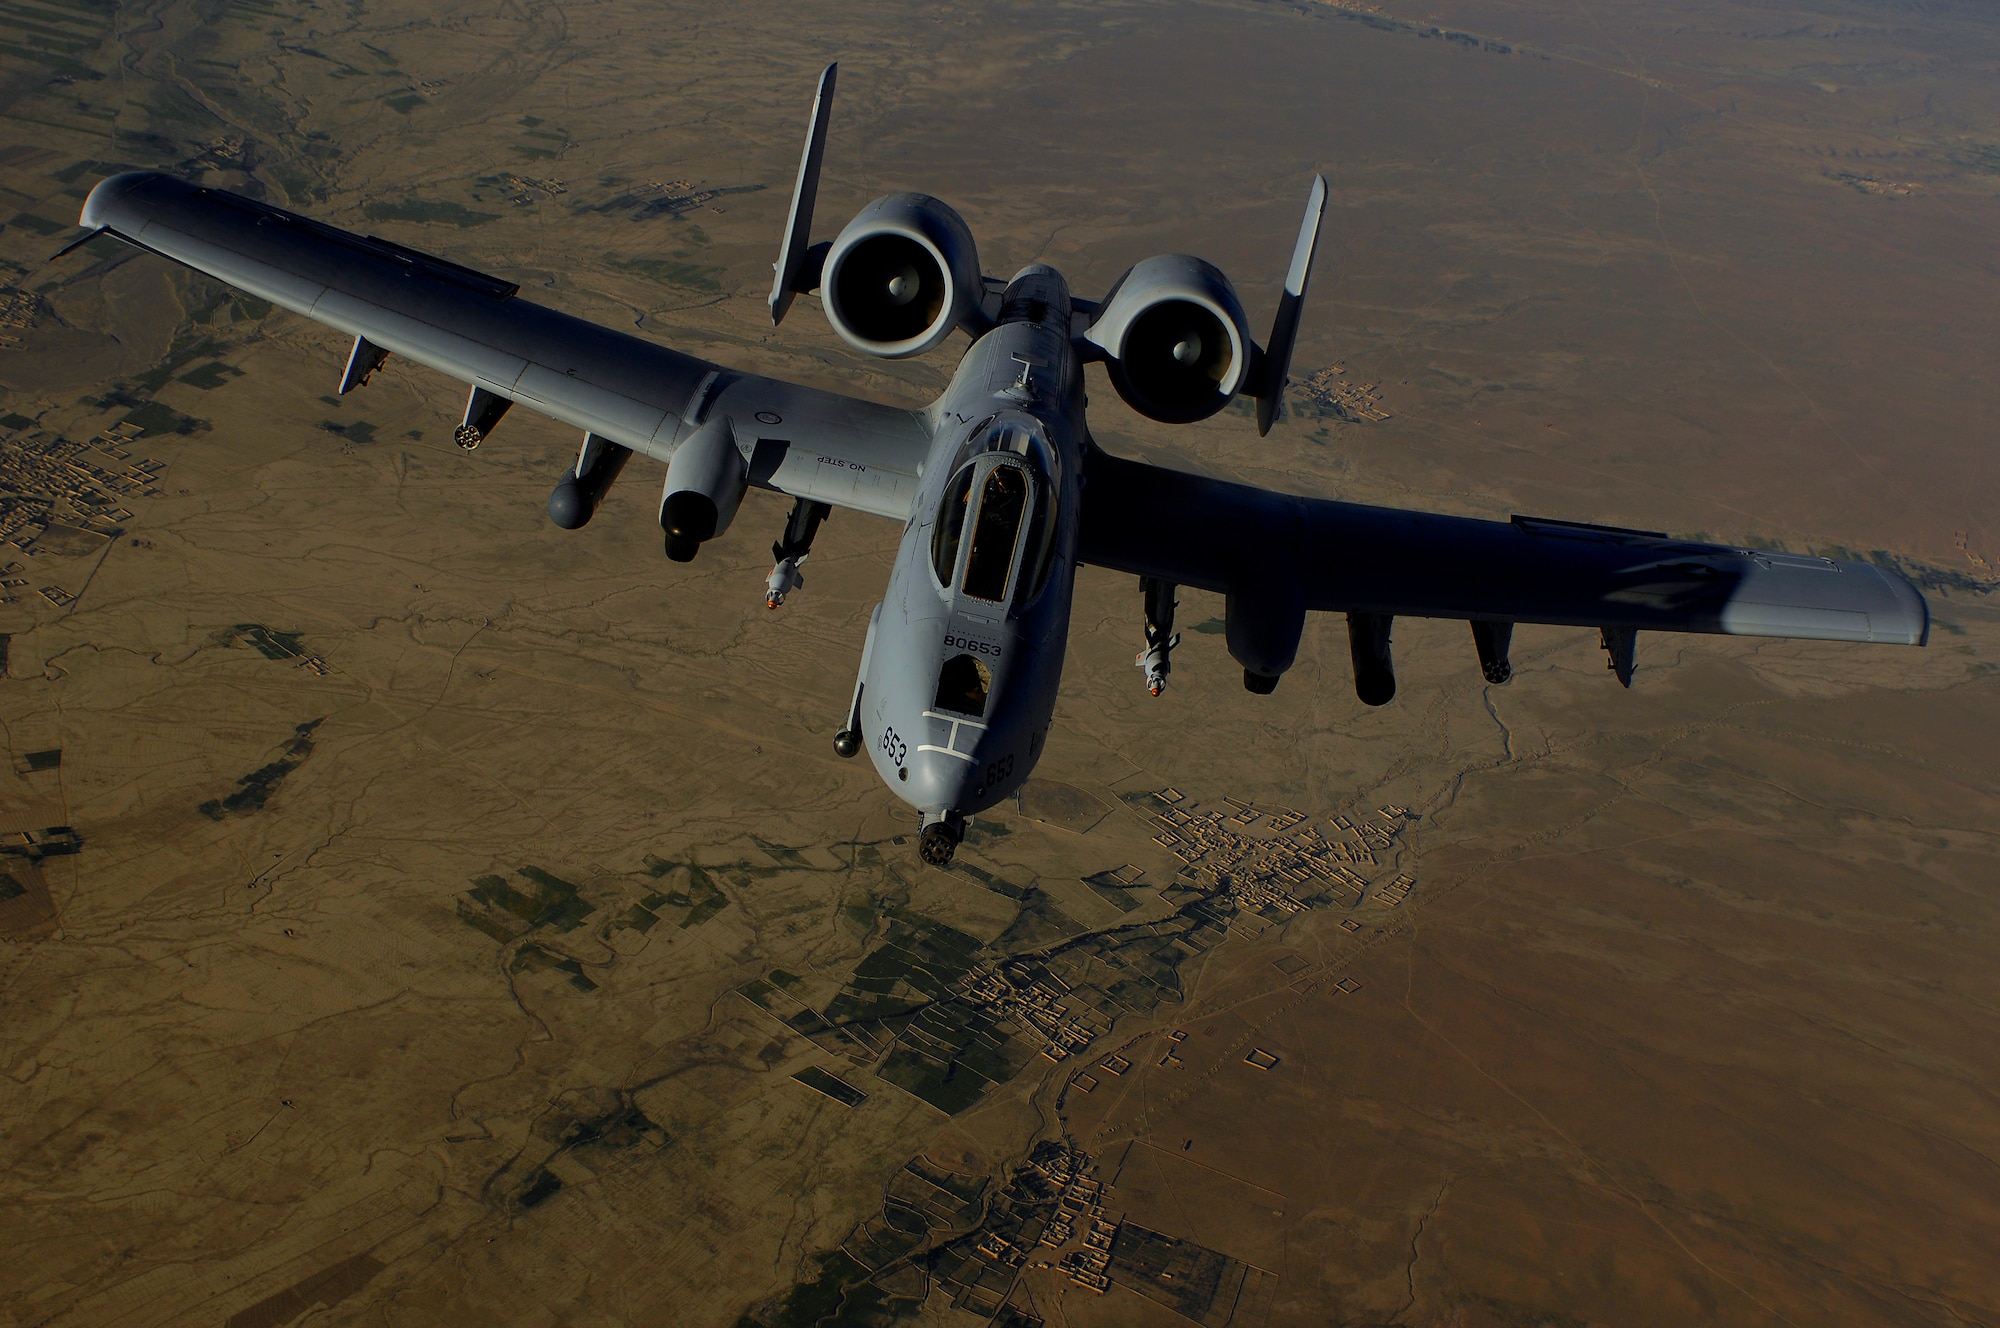 A U.S. Air Force A-10 Thunderbolt aircraft moves into position to receive fuel May 29, 2008 from a KC-135 Stratotanker during a mission over Afghanistan. A-10 is deployed to Operation Enduring Freedom and the KC-135 is assigned to the 22nd Expeditionary Air Refueling Squadron, 376th Air Expeditionary Wing Manas Air Base Kyrgyzstan and is deployed from 141st Air Refueling Wing Fairchild Air Force Base Wash. (U.S. Air Force photo by Master Sgt. Andy Dunaway) (Released)
